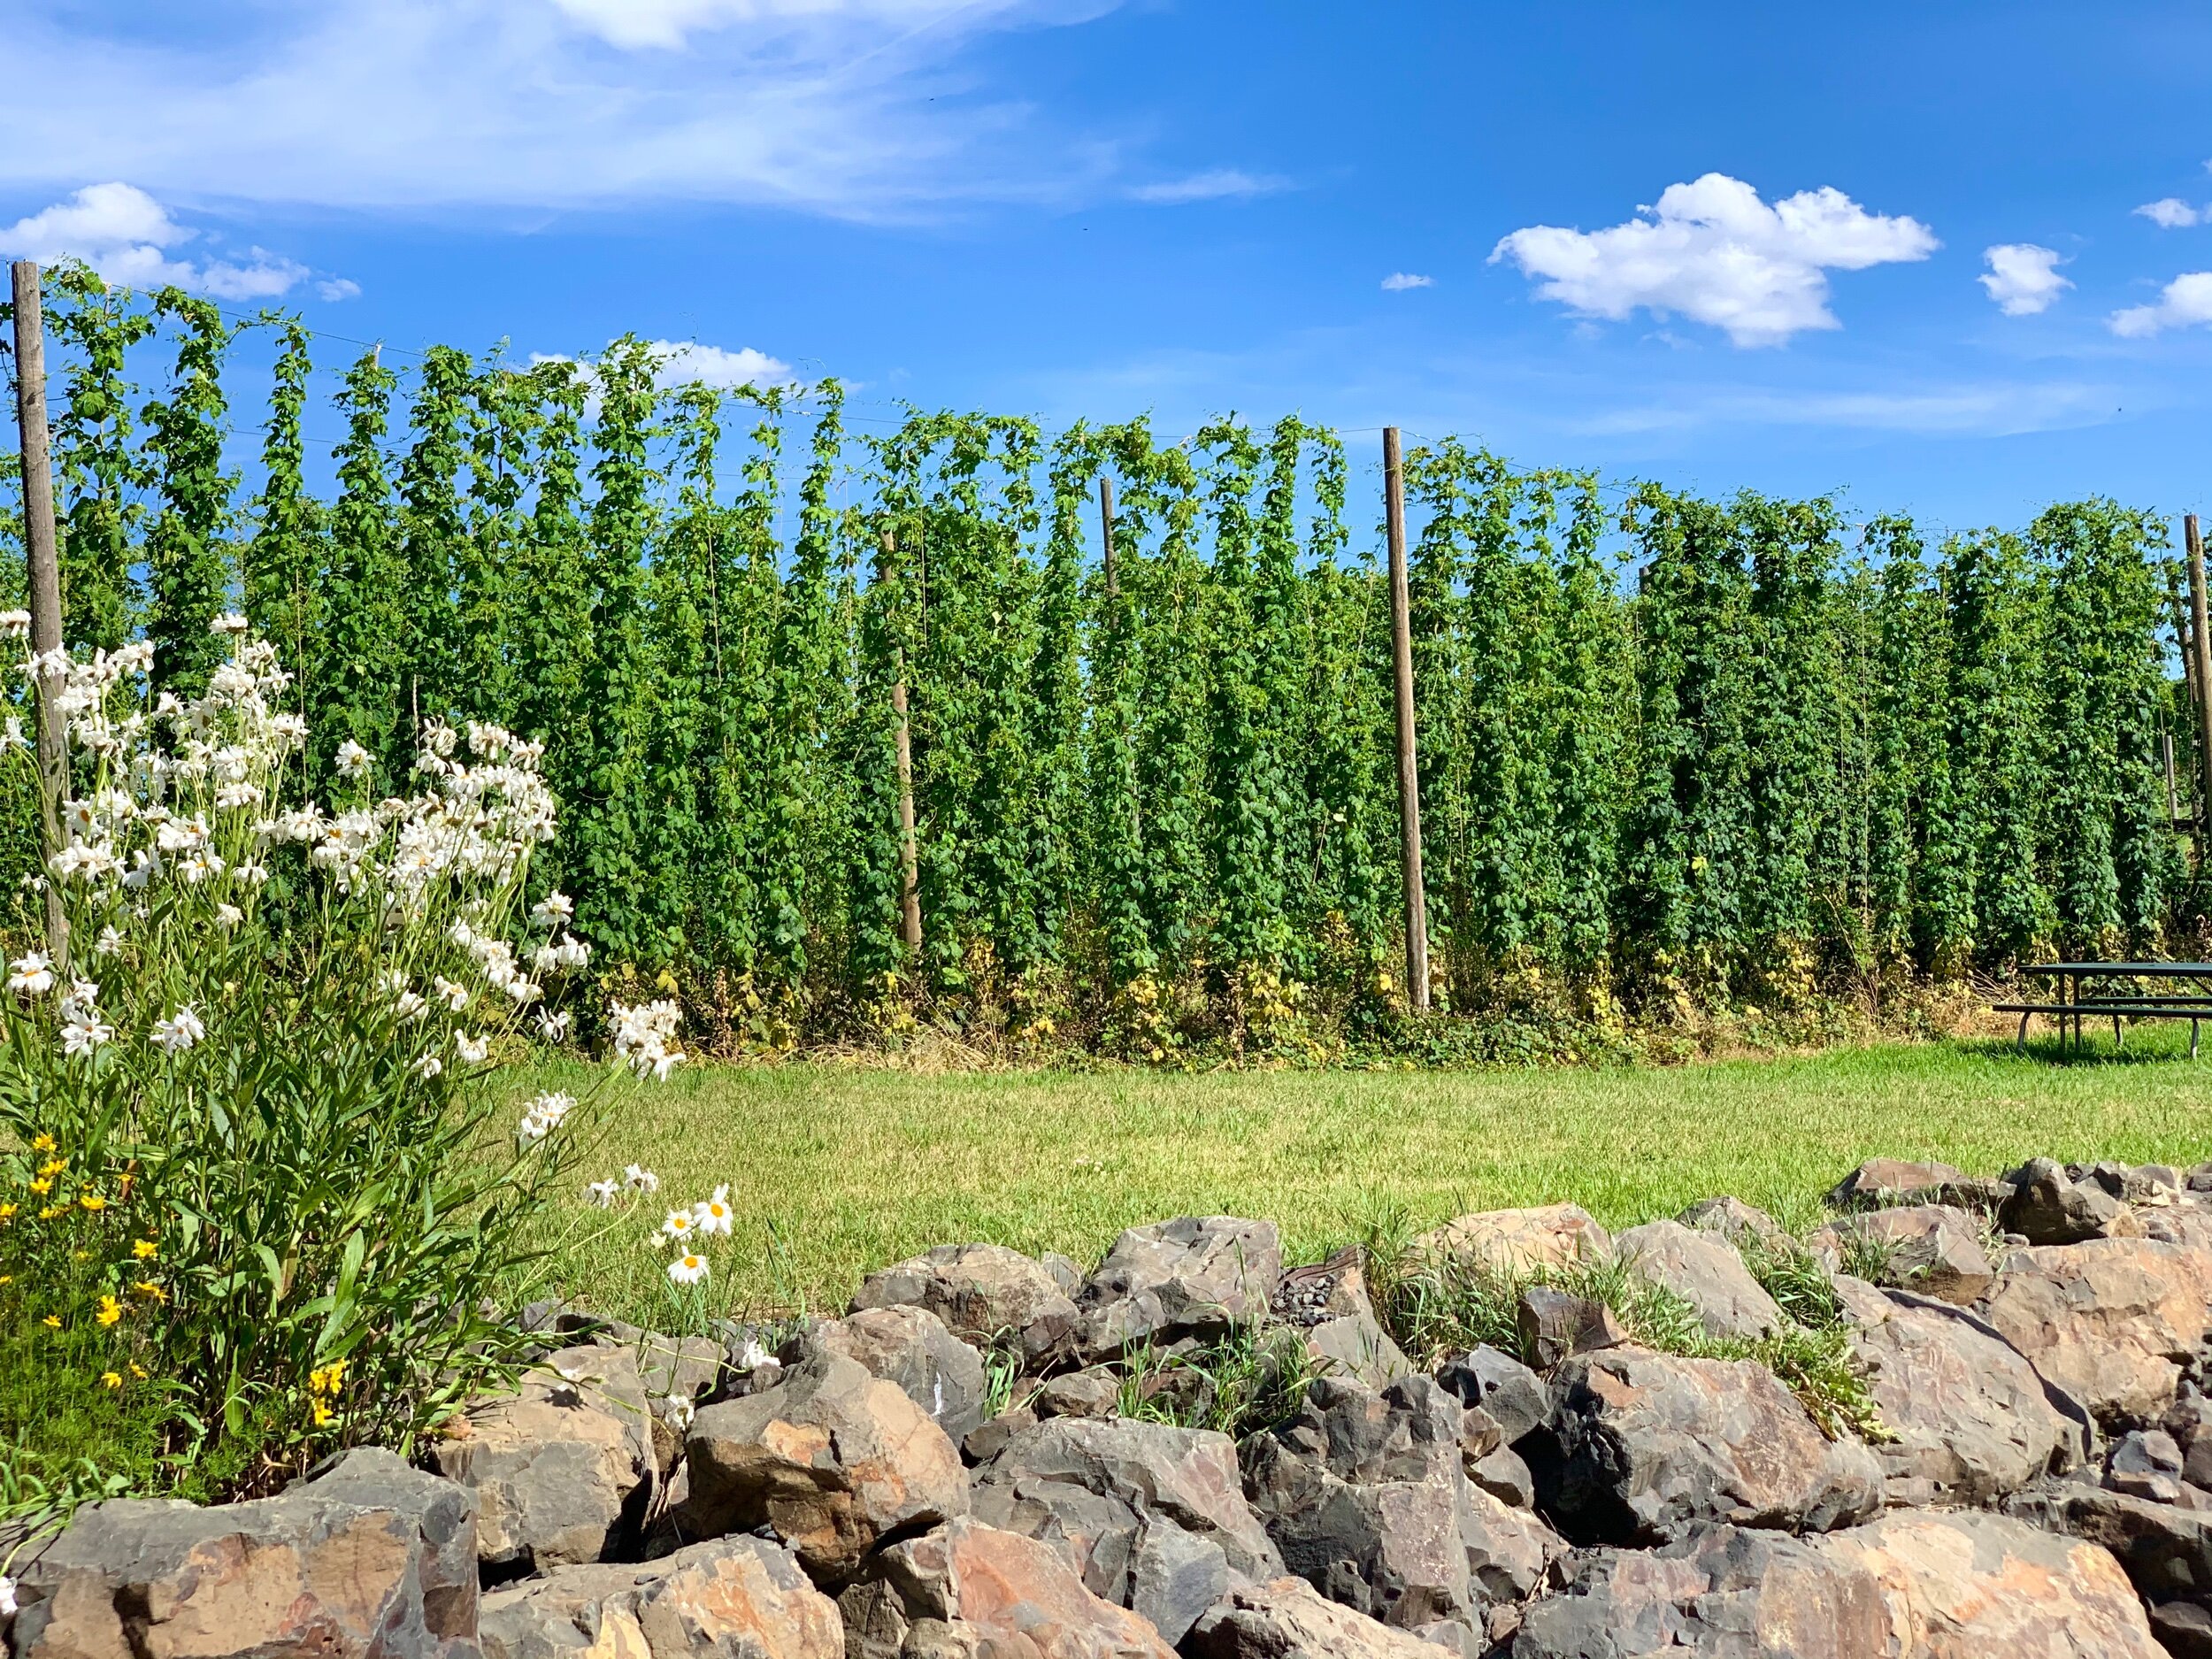  We had never seen hops growing before coming to Red Barn.  